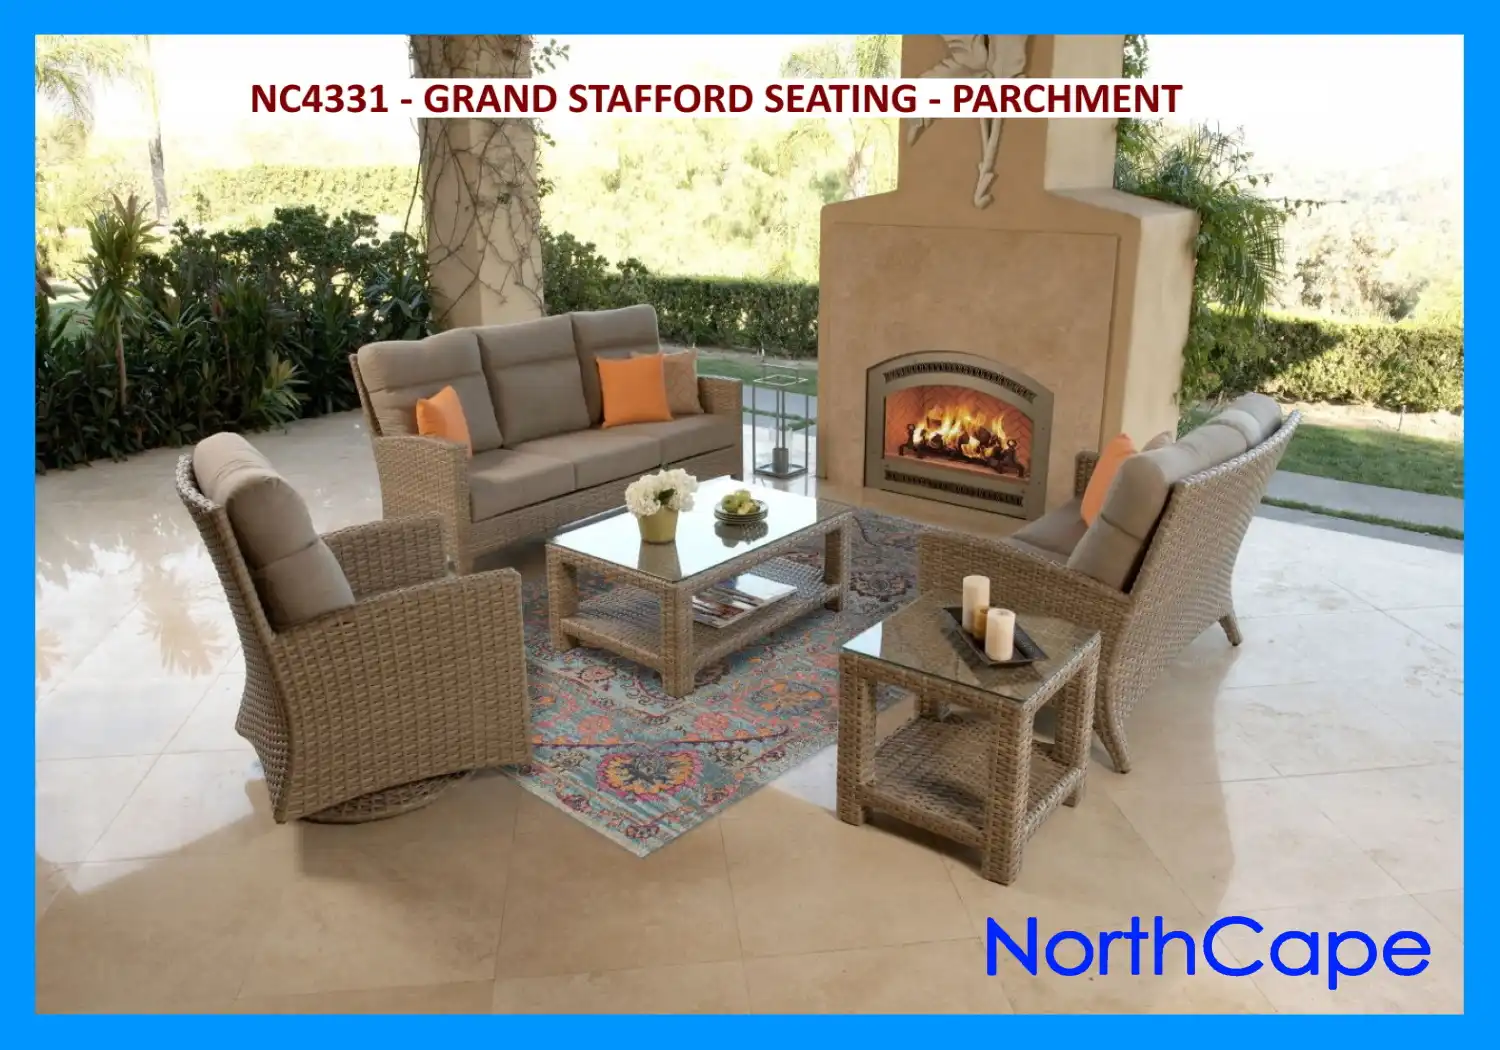 NC4331 - GRAND STAFFORD SEATING - PARCHMENT